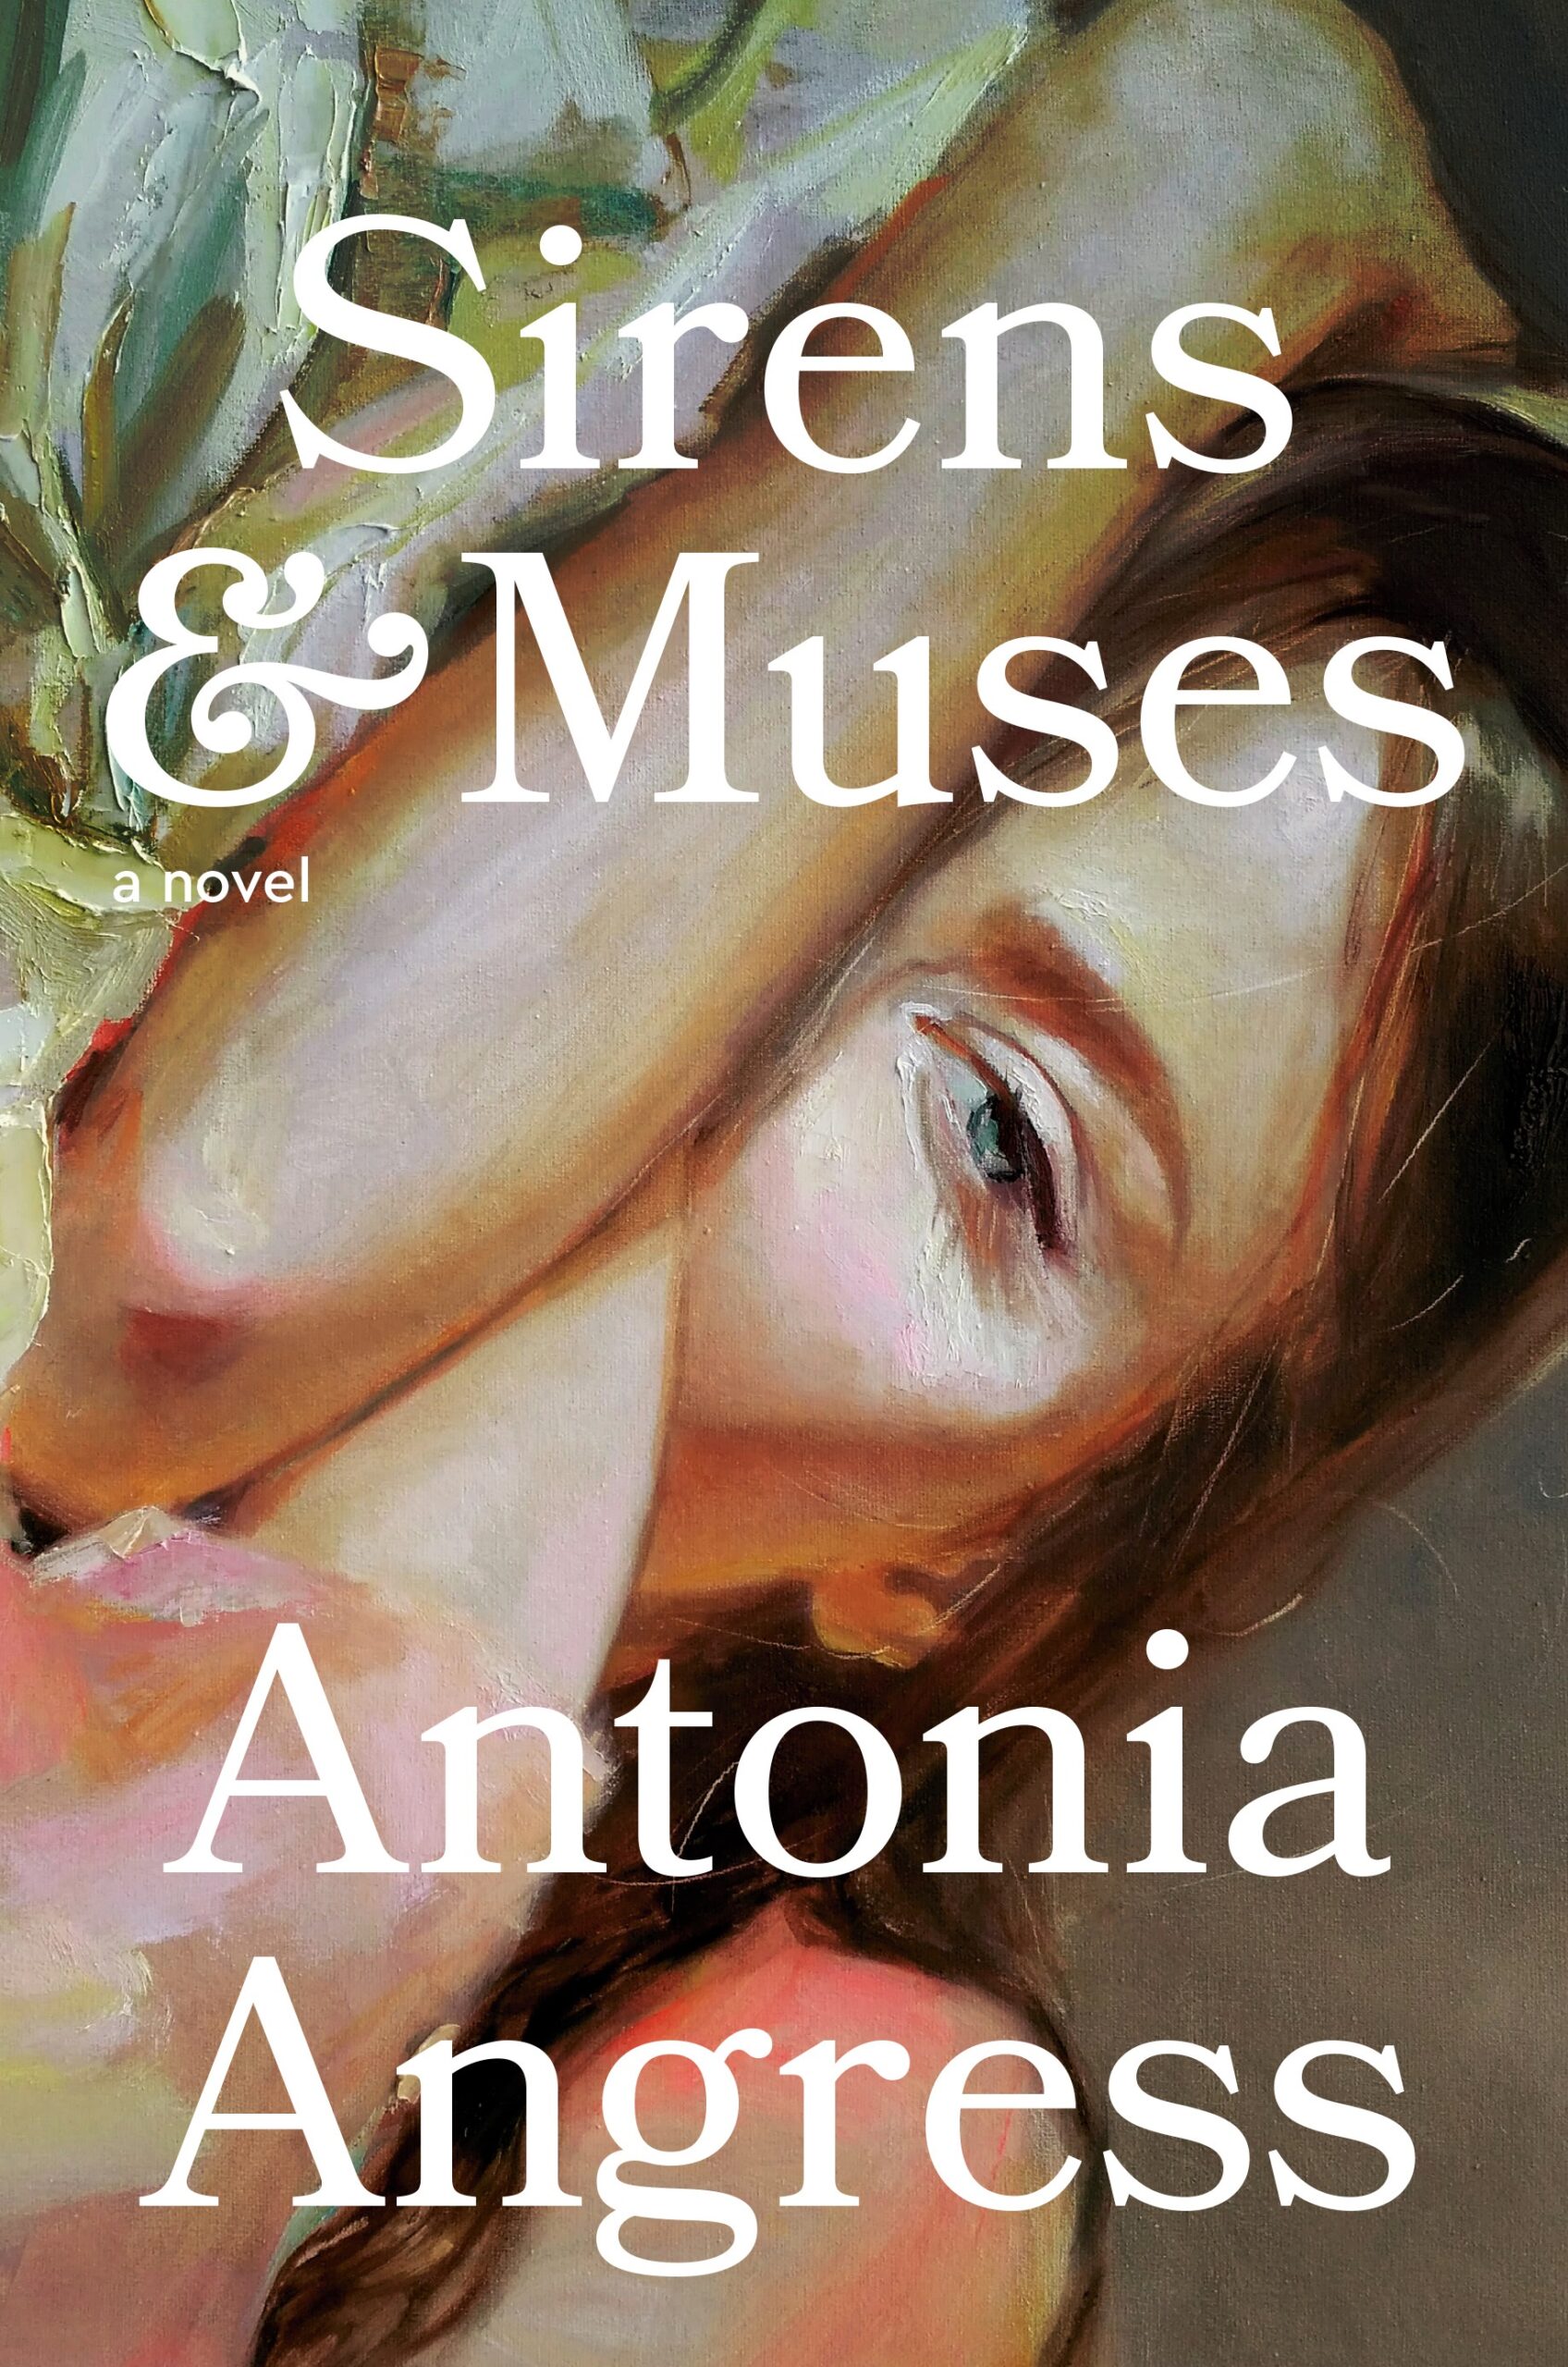 Book Launch: Sirens & Muses by Antonia Angress, in conversation with Emi Nietfeld